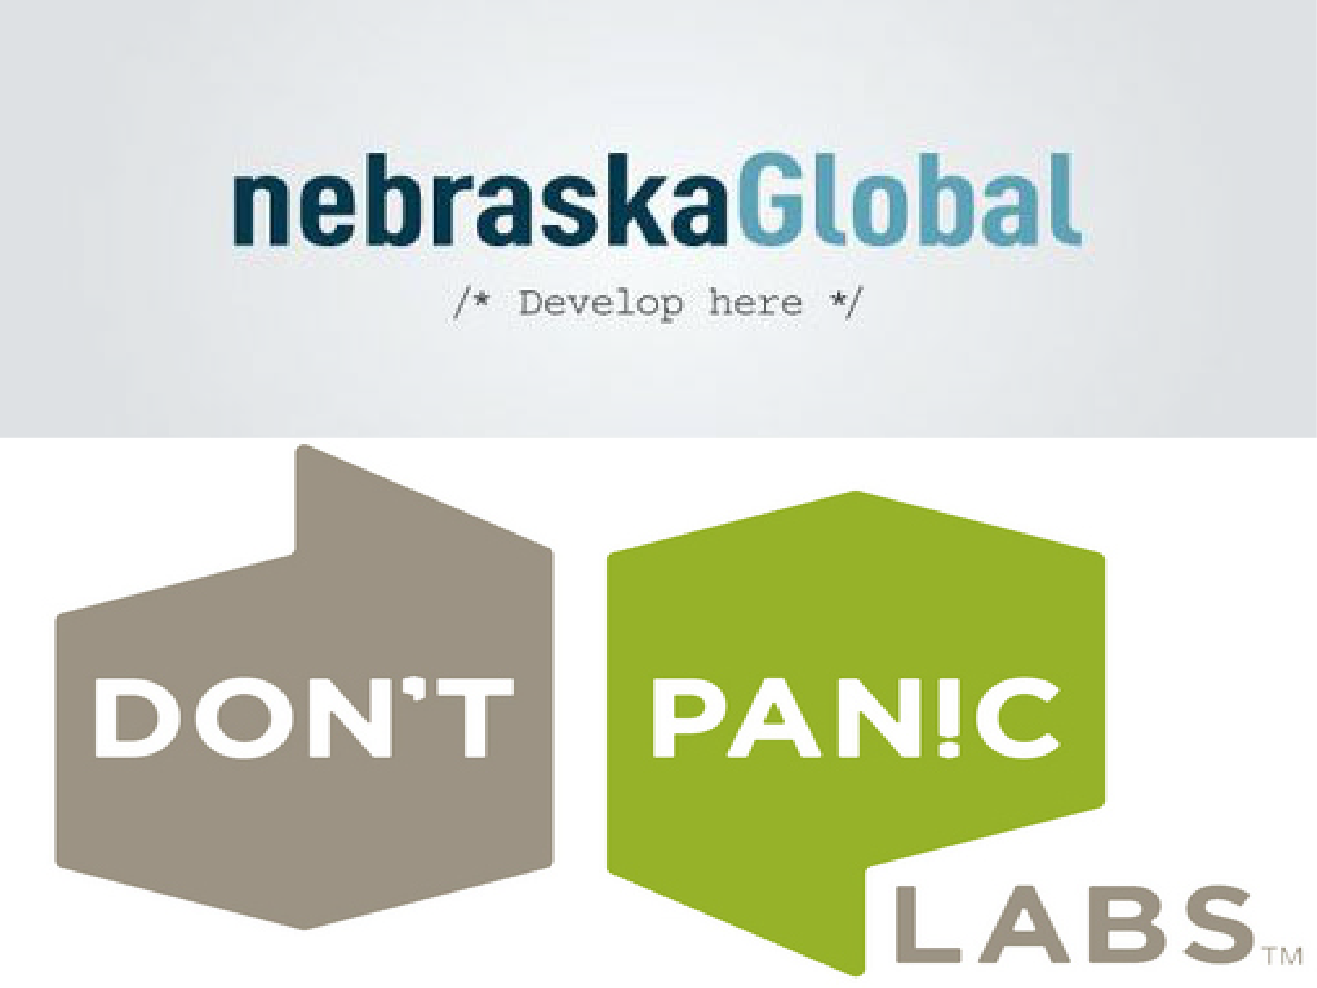 Nebraska Global and Don't Panic Labs will be on campus on January 31st. 